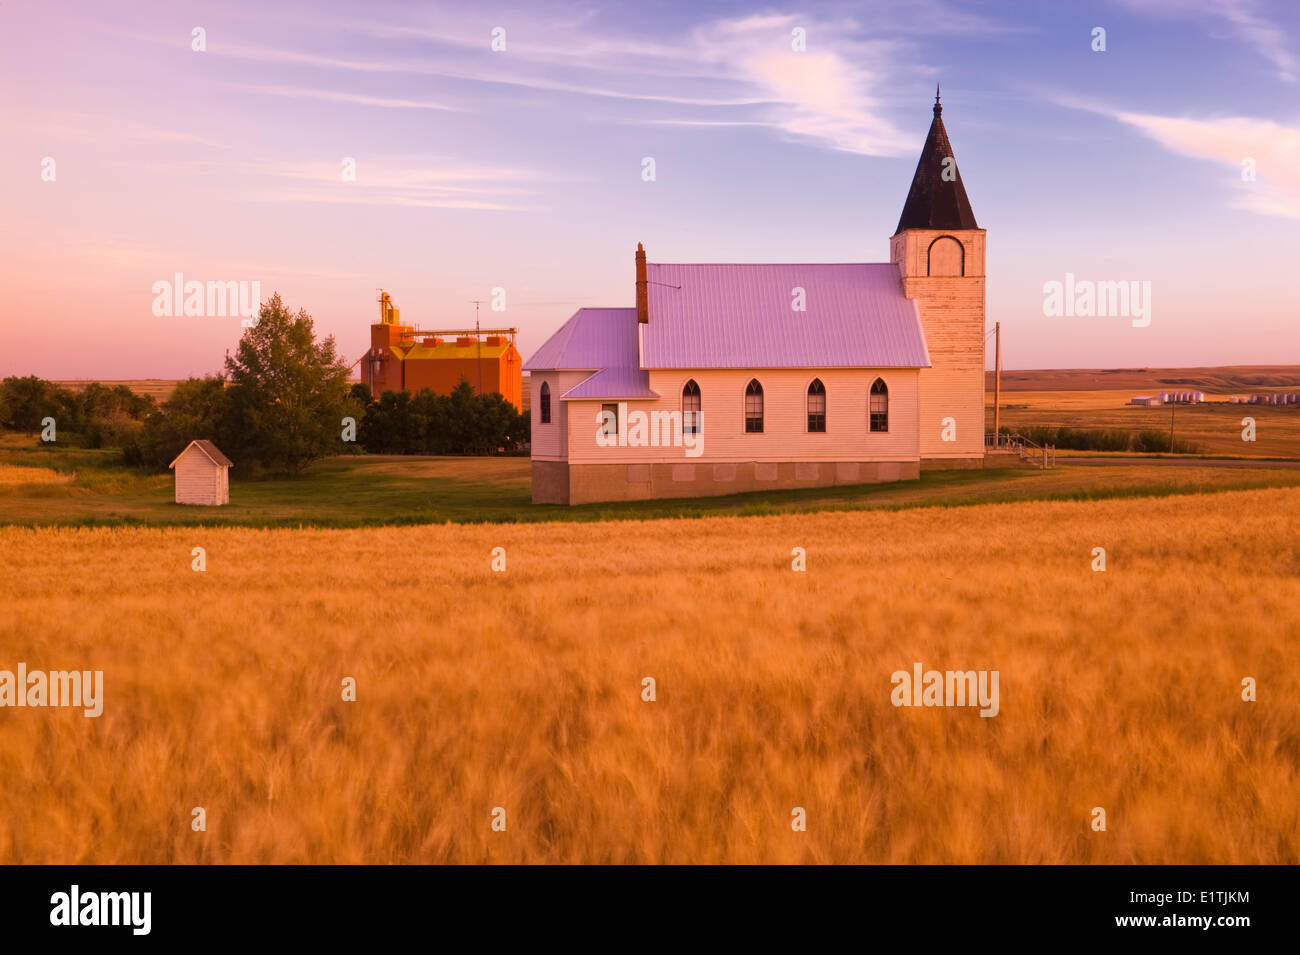 mature, harvest ready wheat field with church and grain elevator in the background, Admiral, Saskatchewan, Canada Stock Photo